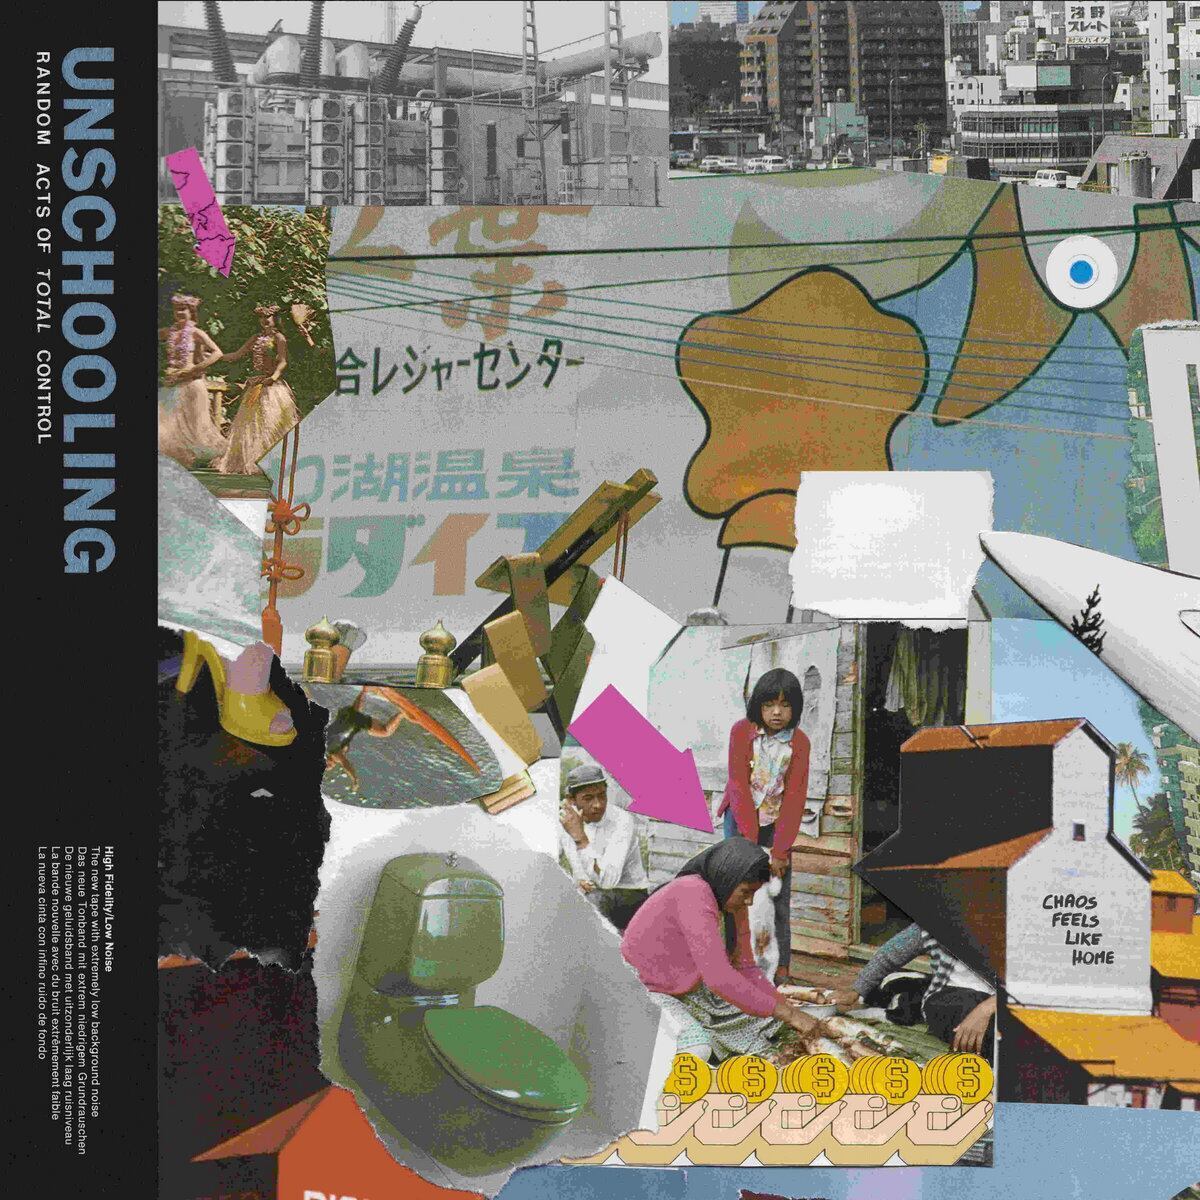 Unschooling / Random Acts Of Total Control（500 Ltd 12inch EP）